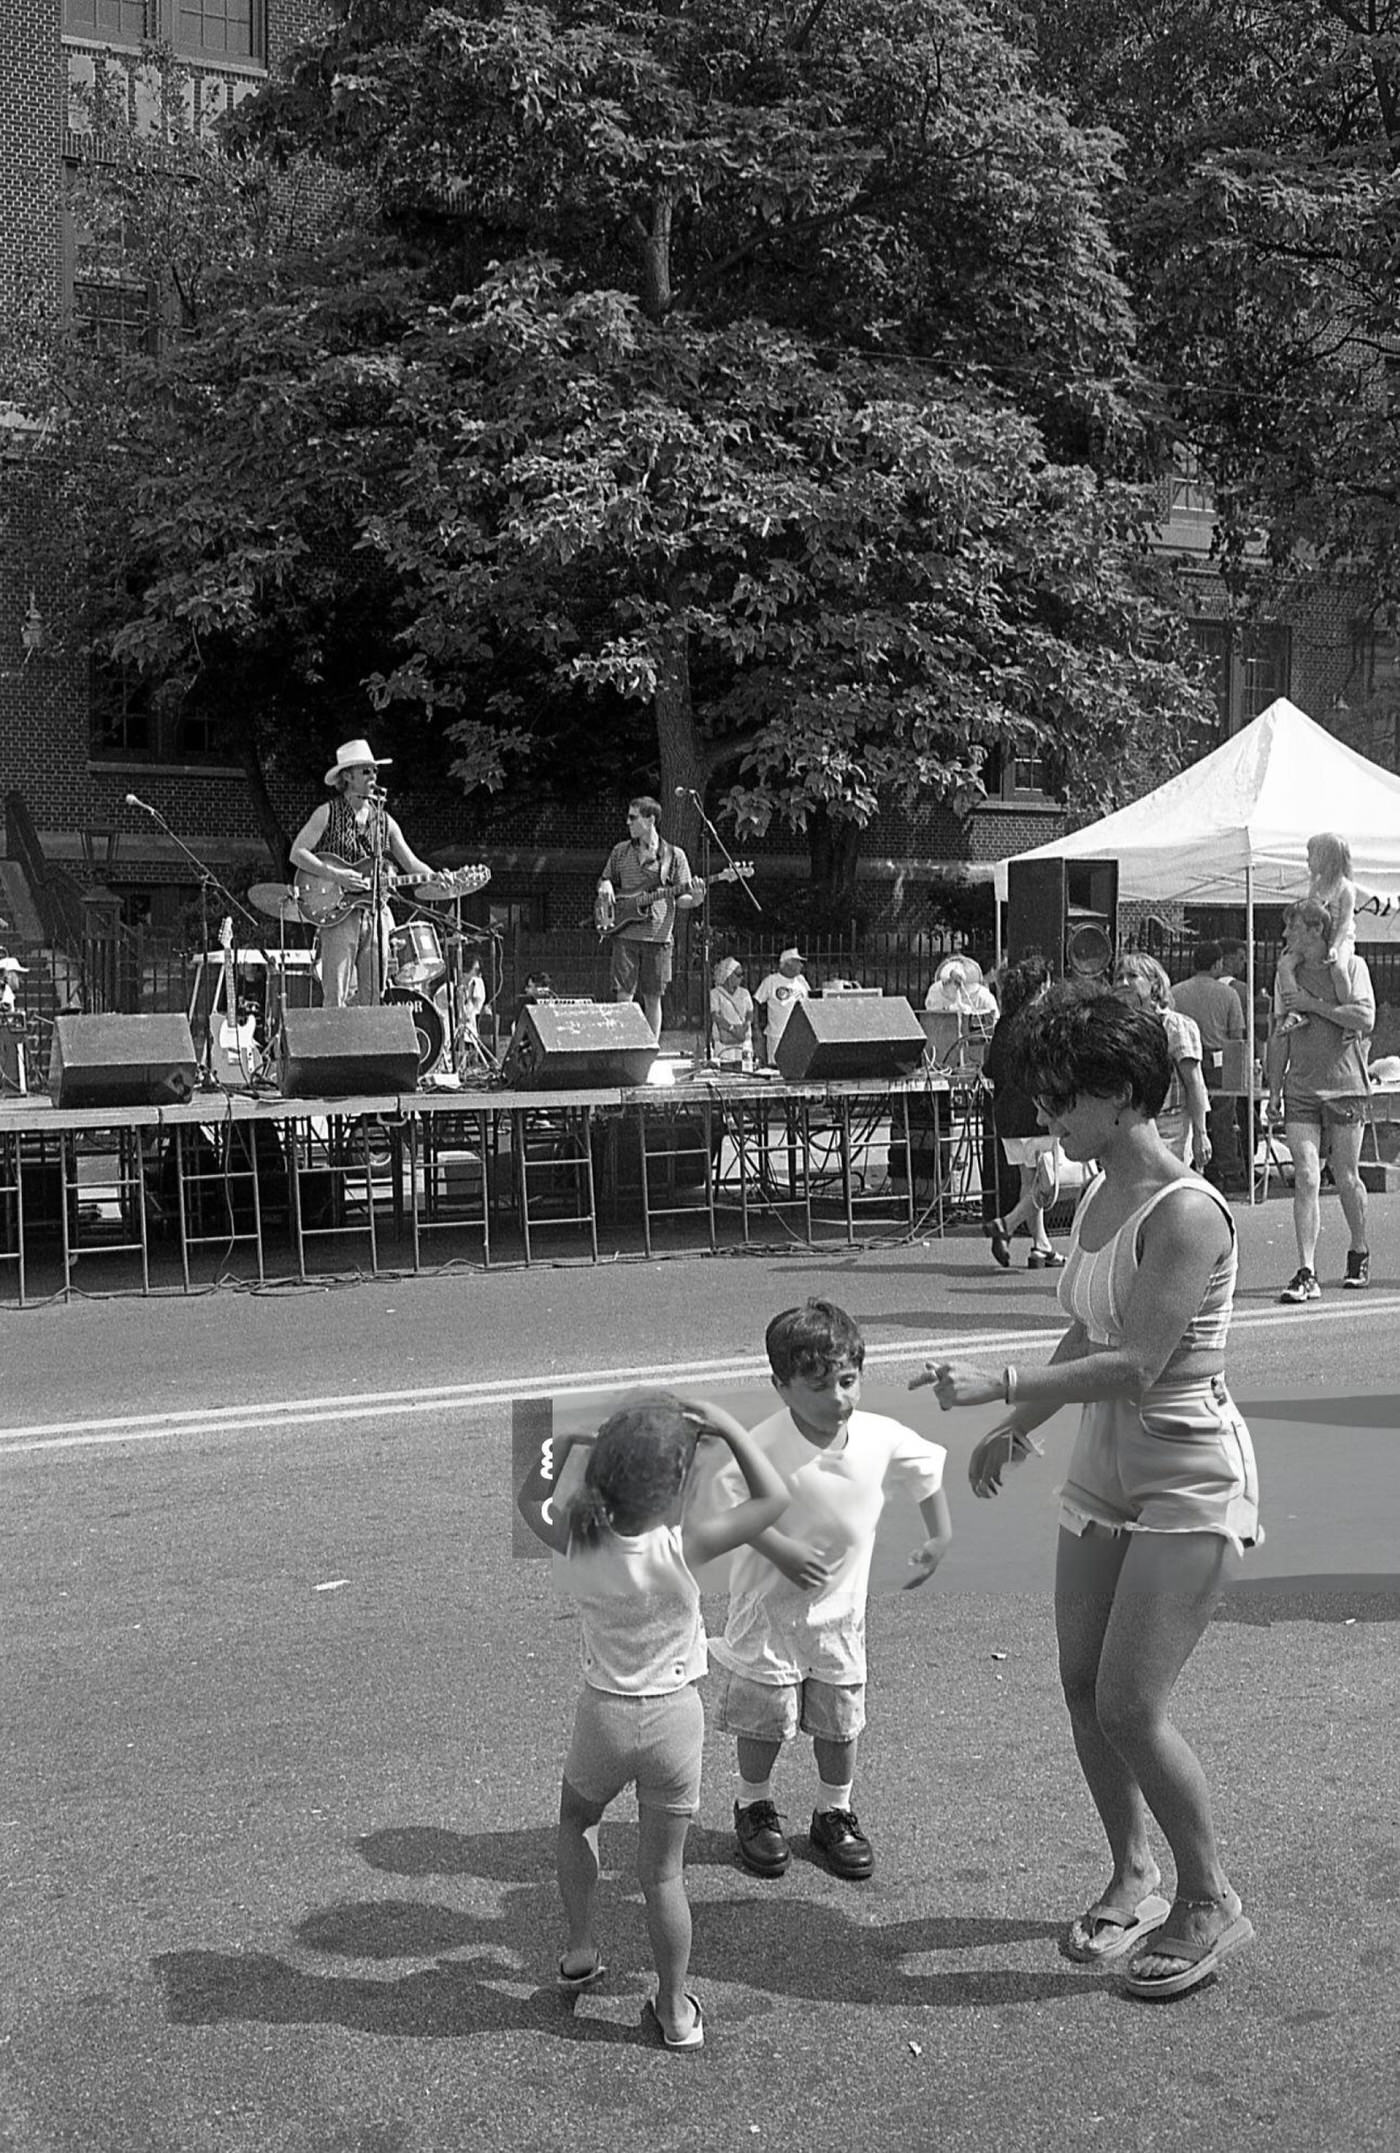 A Woman Dances With Two Children As A Band Performs On Stage During The 63Rd Drive Street Fair, Rego Park, Queens, 1997.